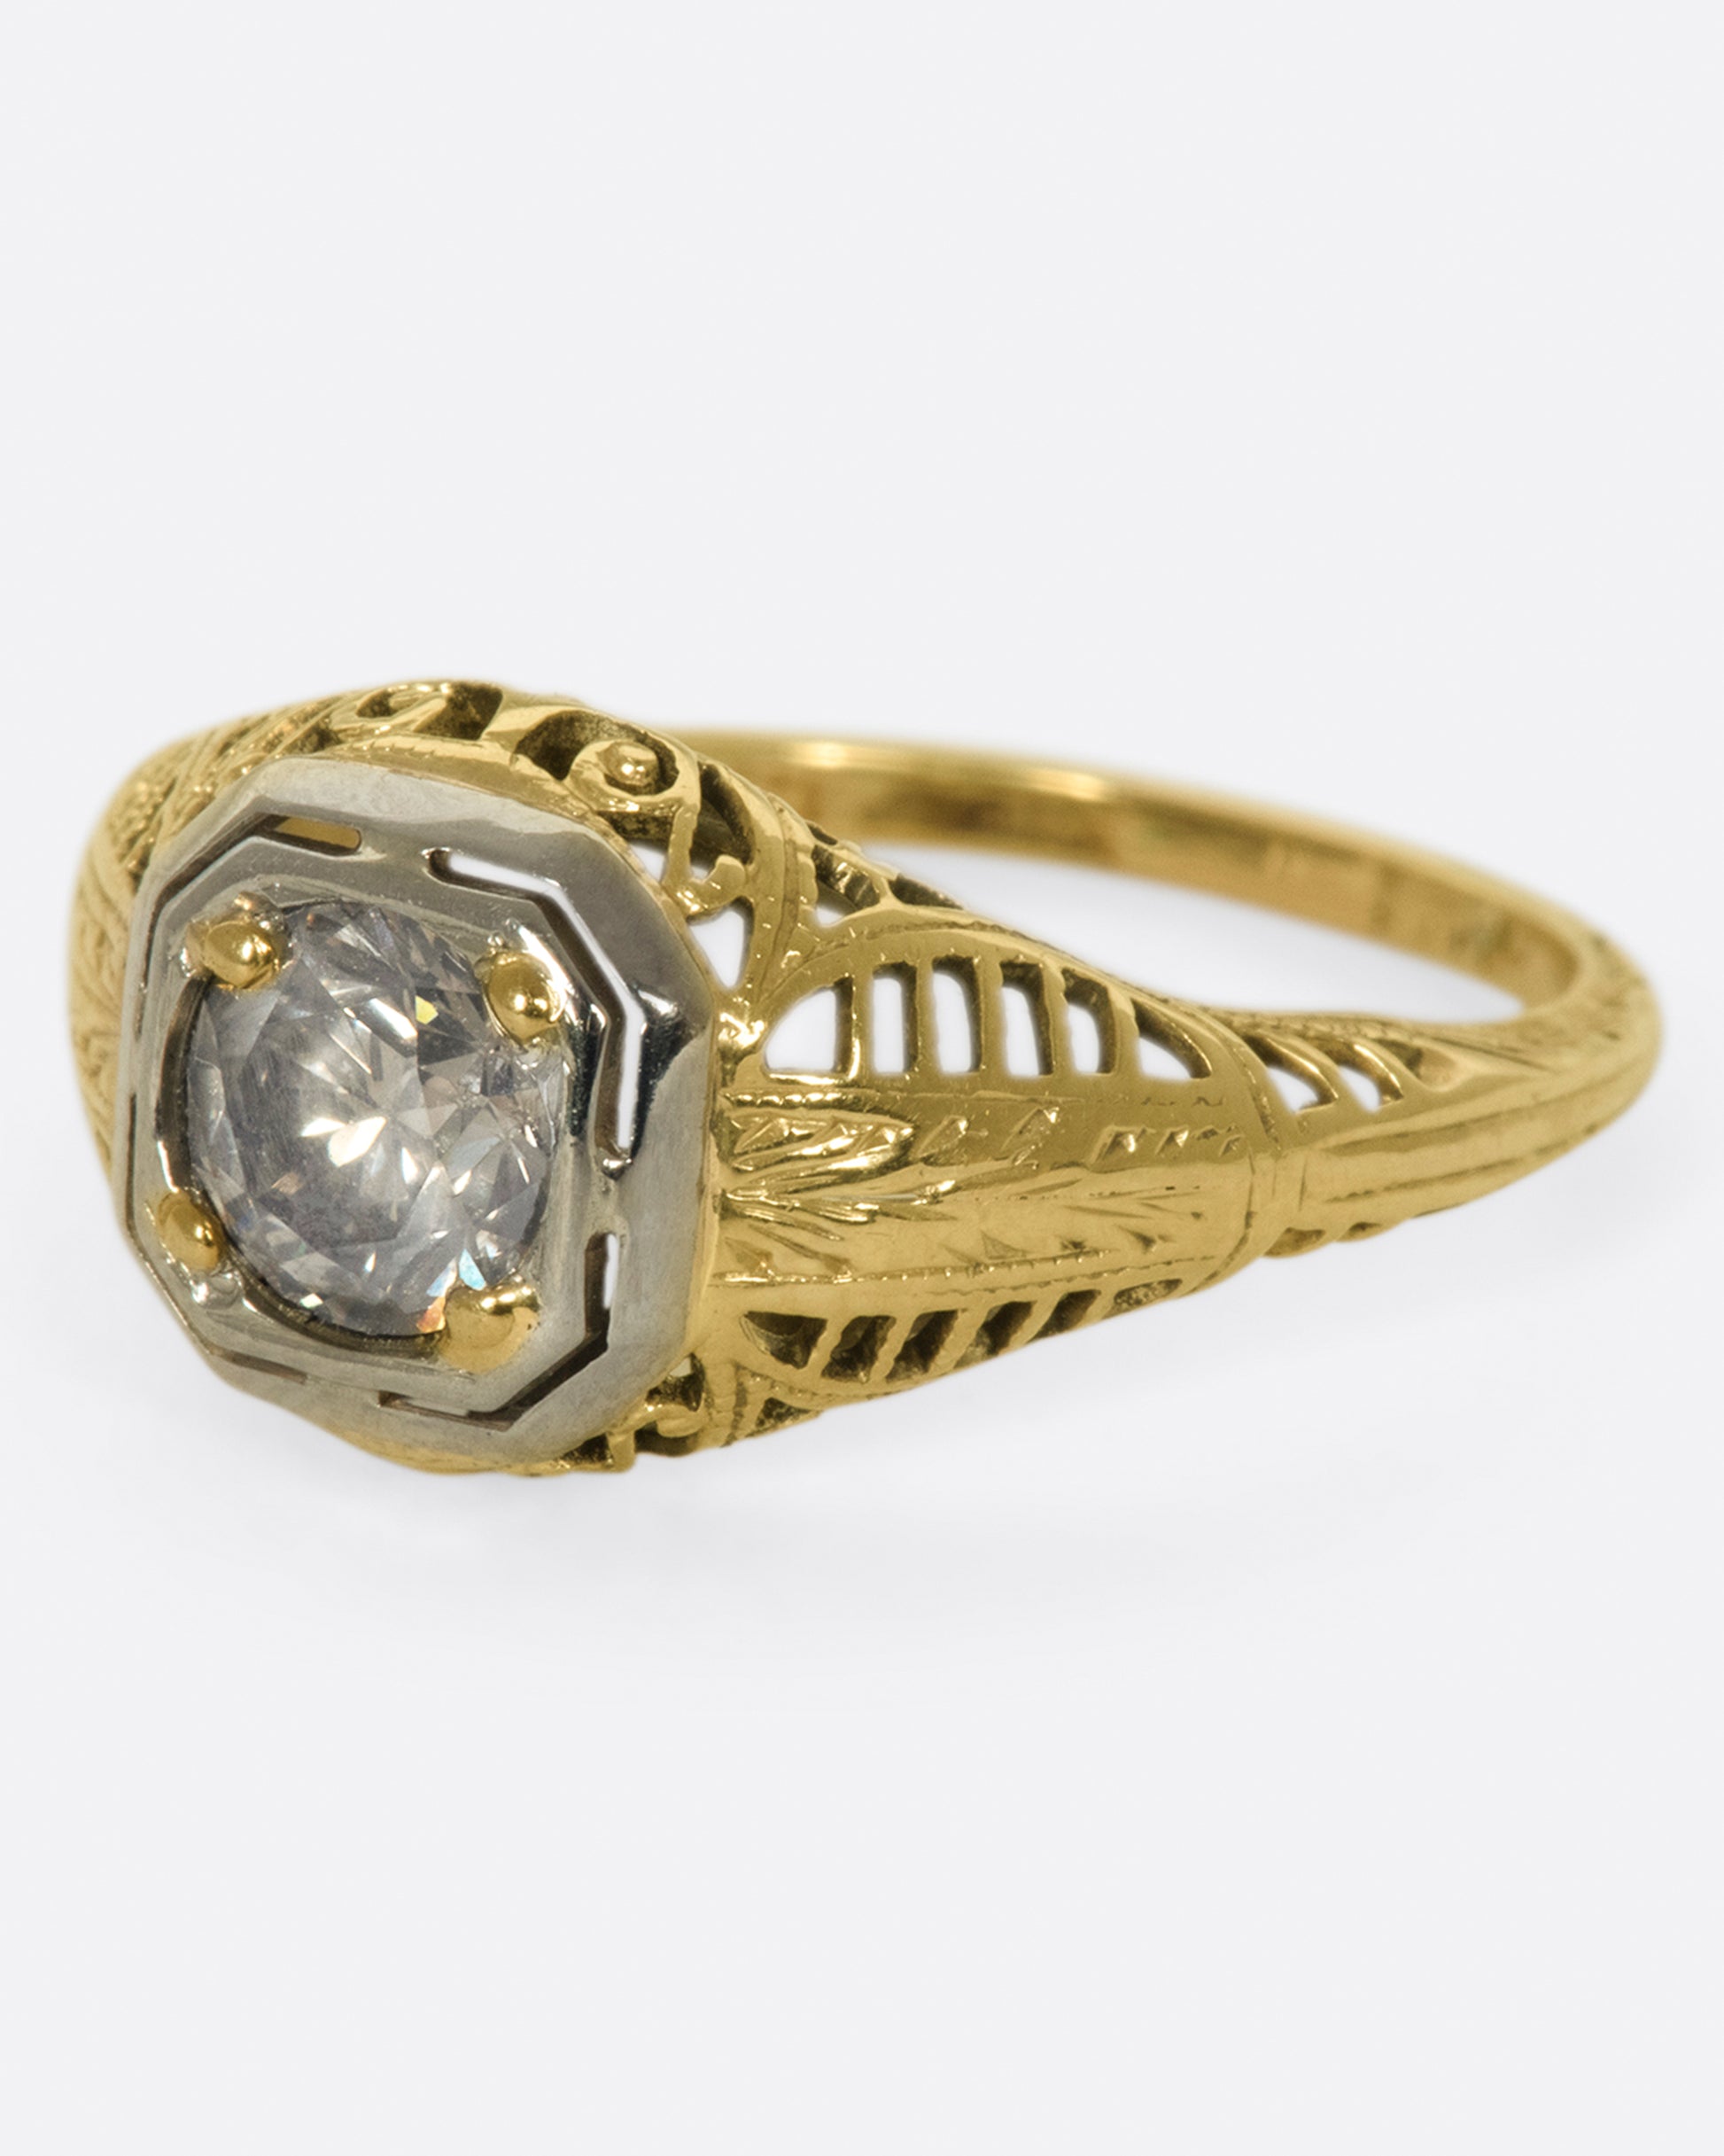 A filigree-covered signet ring with a champagne diamond at its center, set in a white gold bezel.